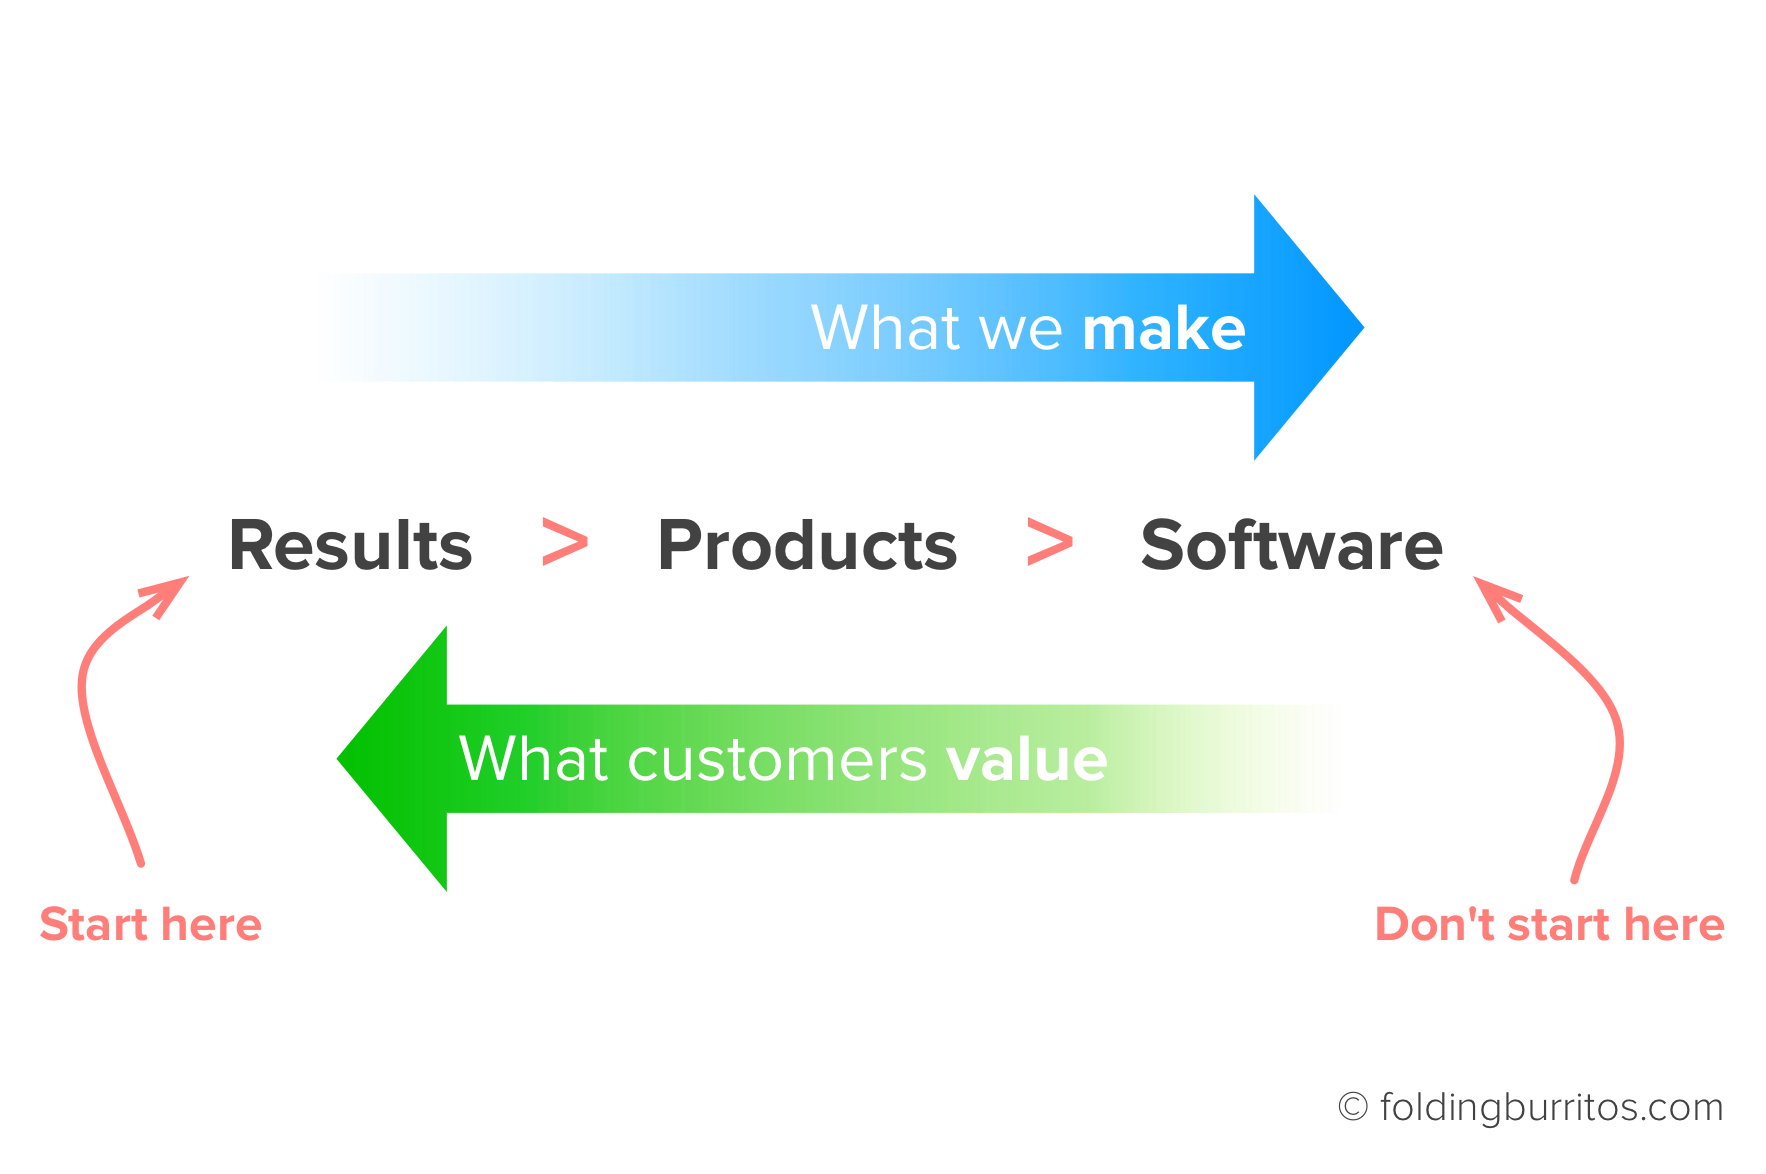 Results > Products > Software